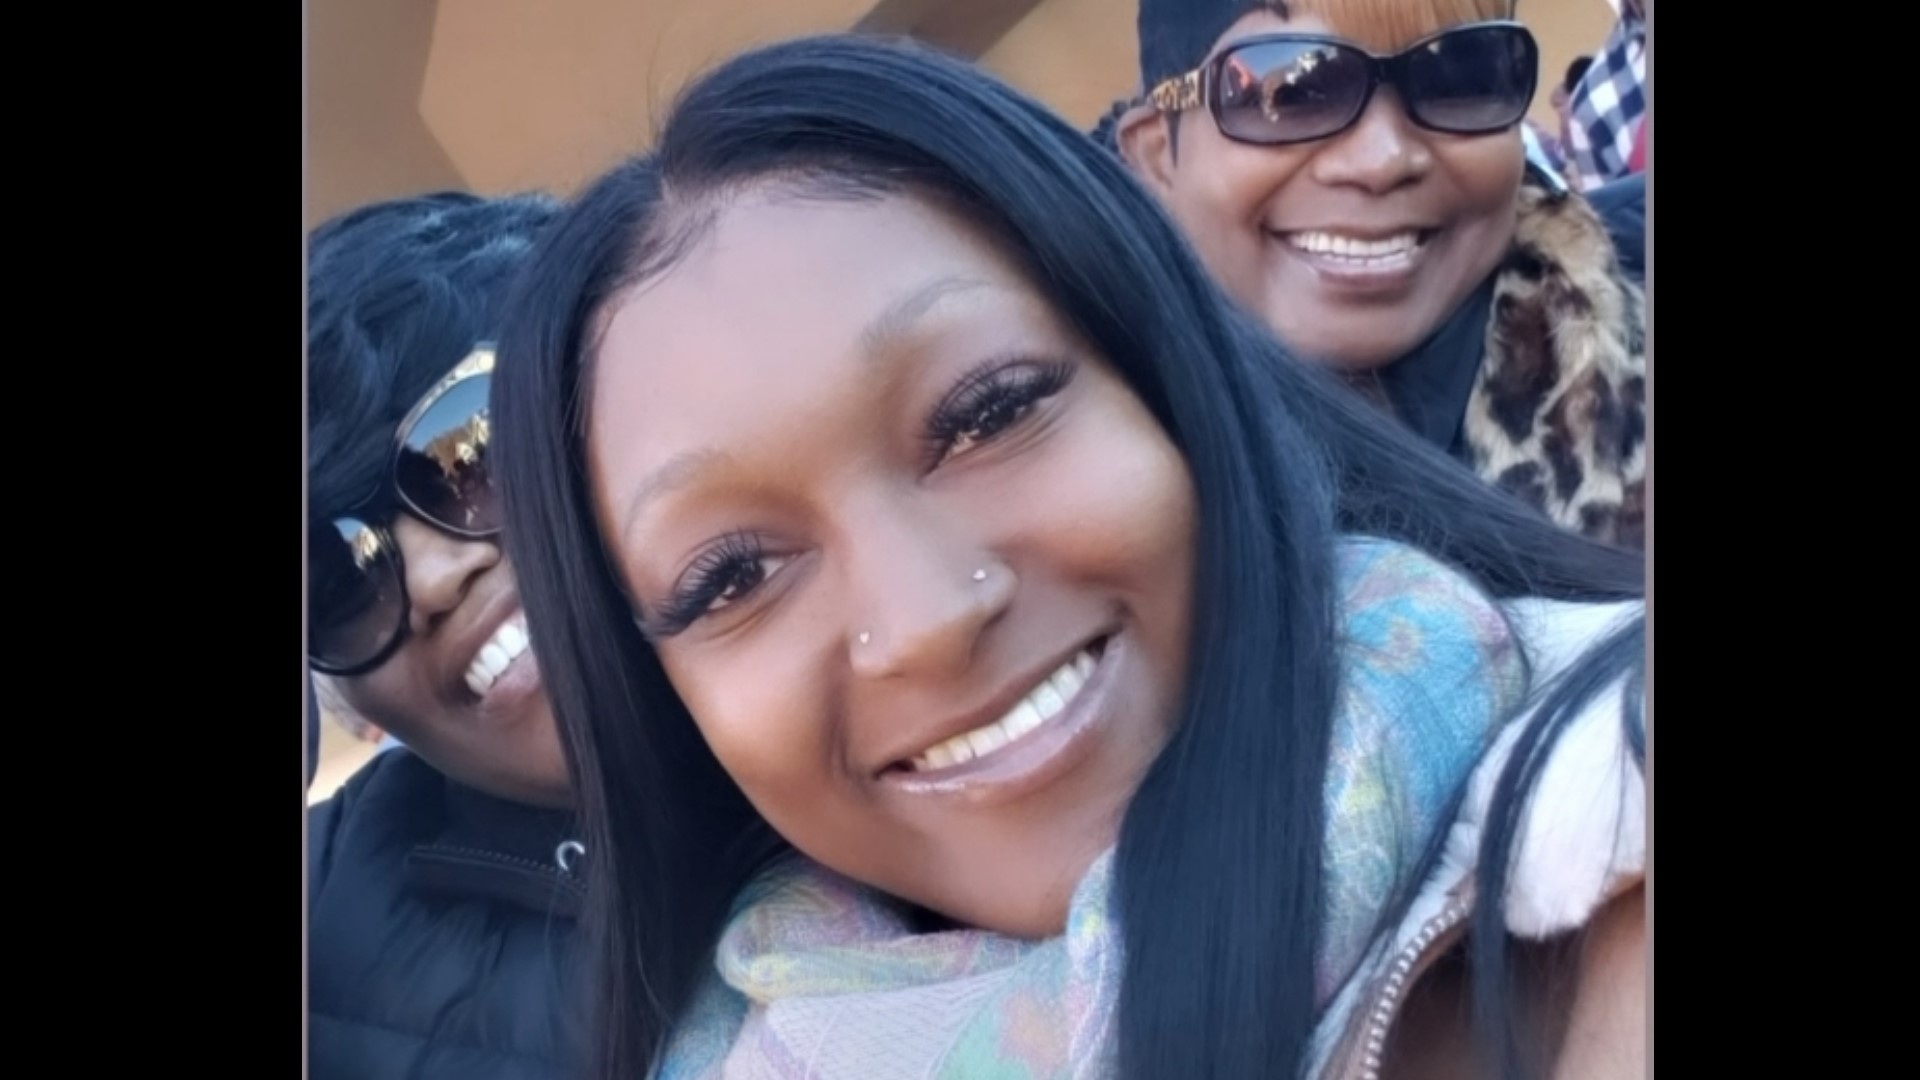 Shanquella Robinson died while vacationing in Cabo with friends according to her family. Questions surround how she died.